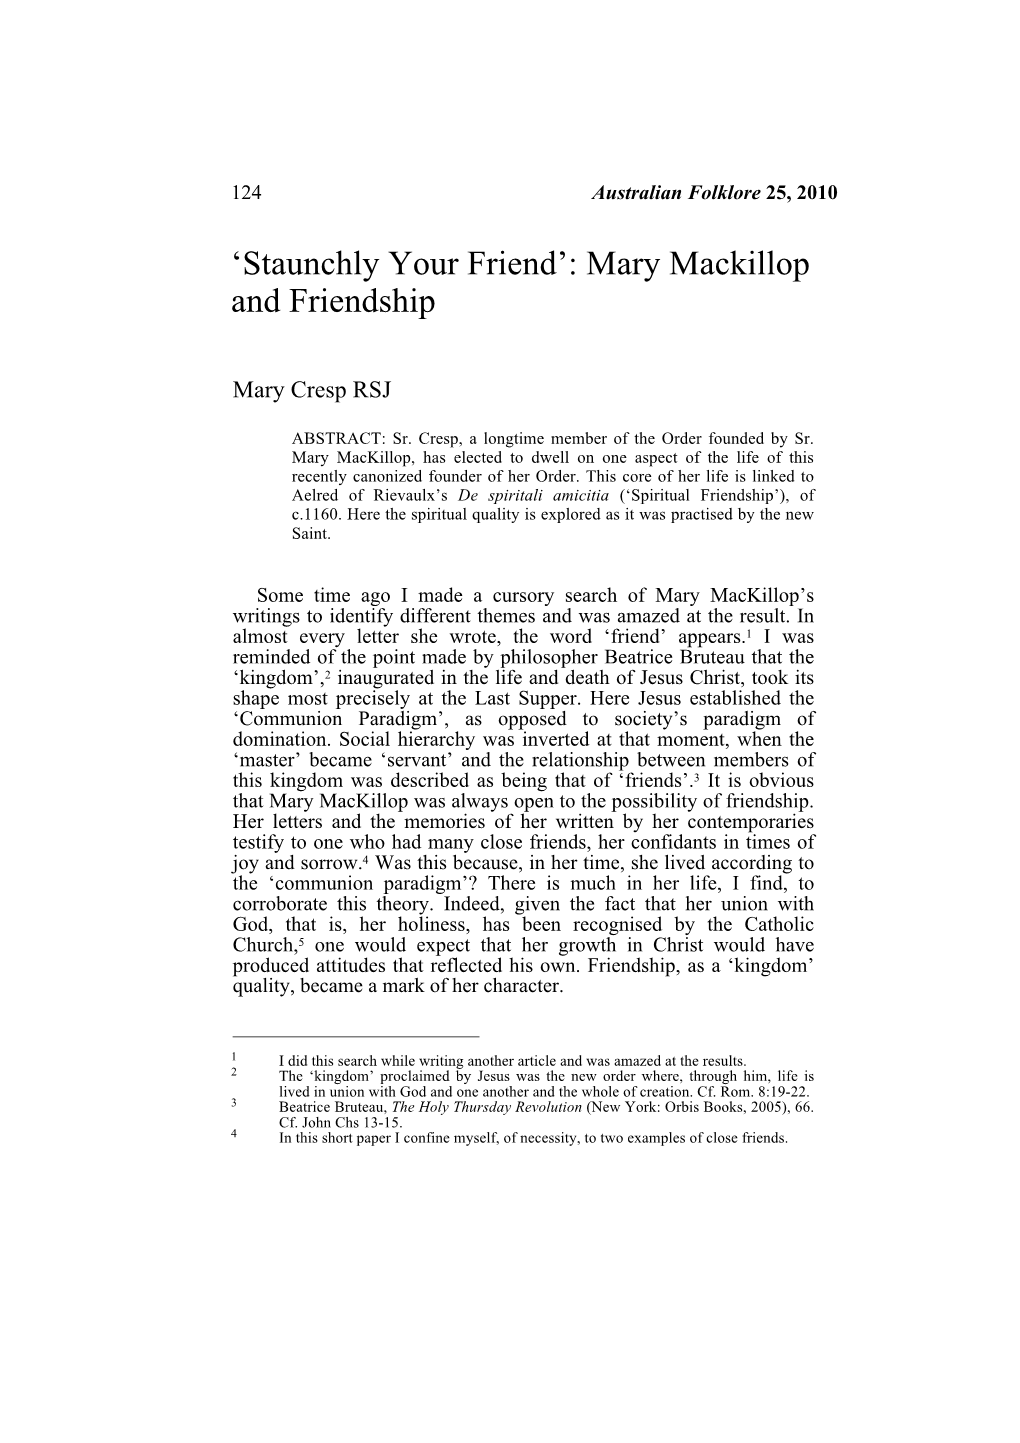 Mary Mackillop and Friendship